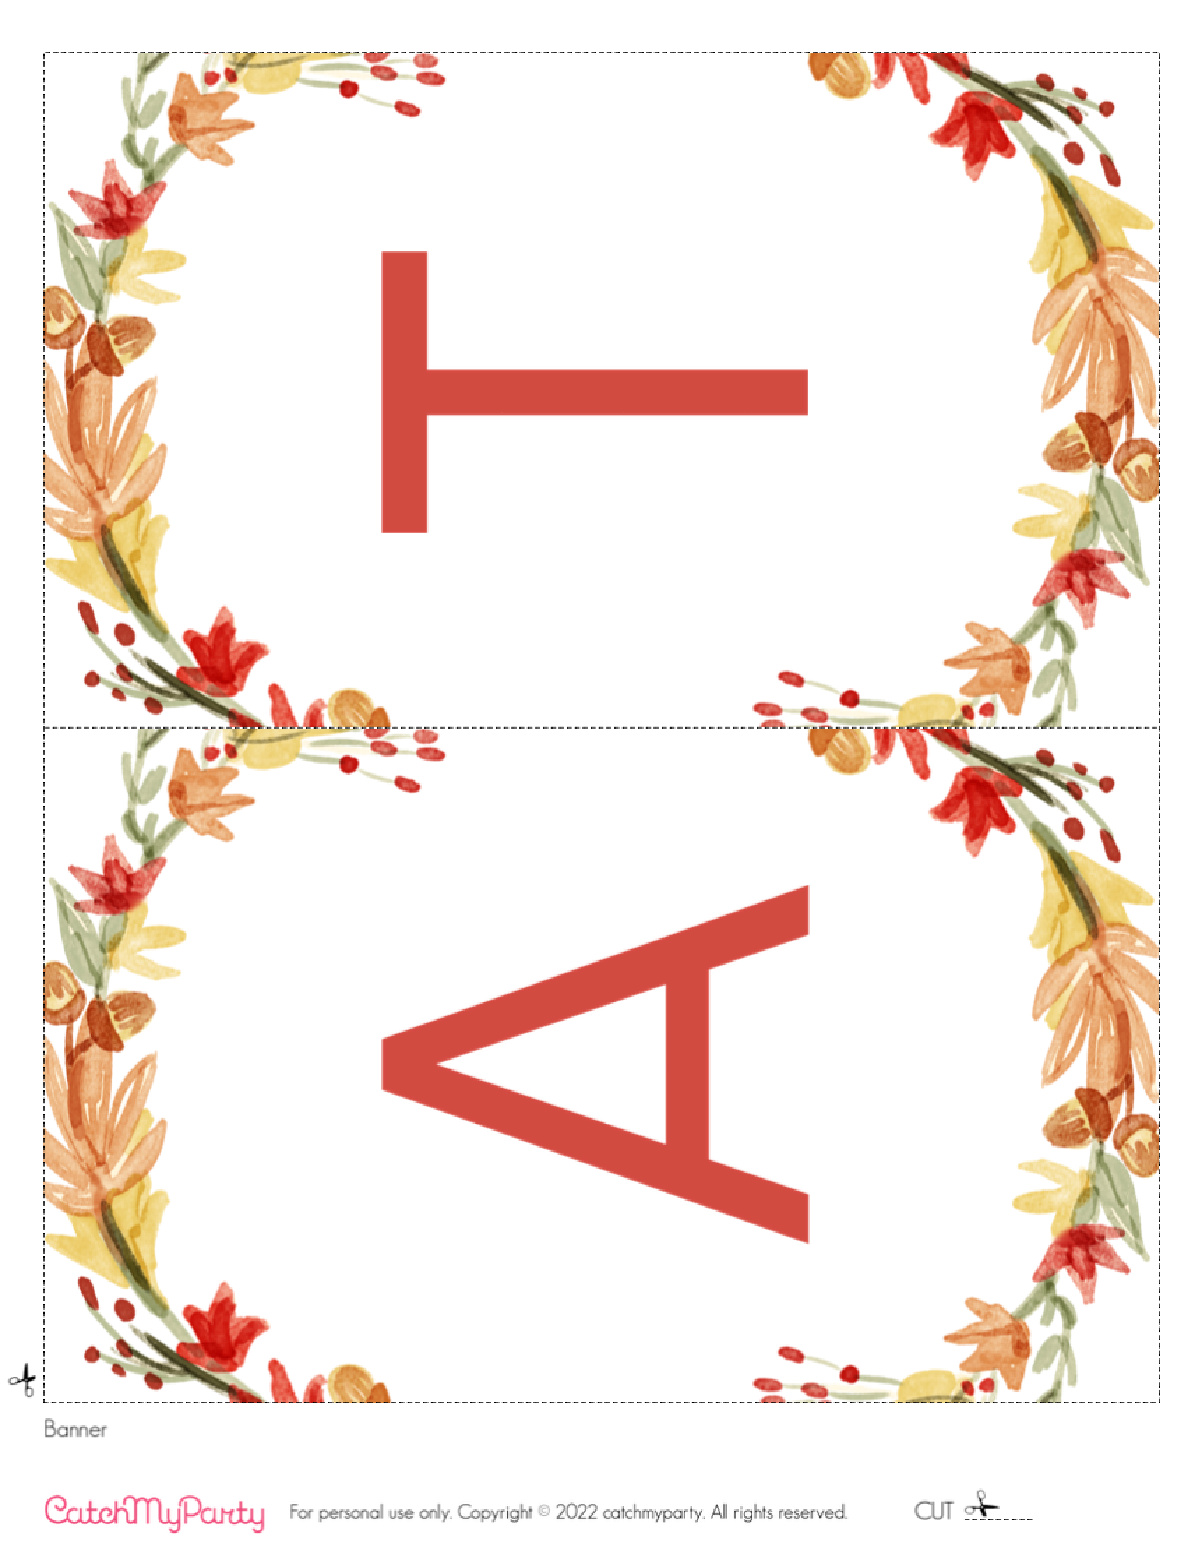 Download these FREE Friendsgiving Printables - Grateful Banner